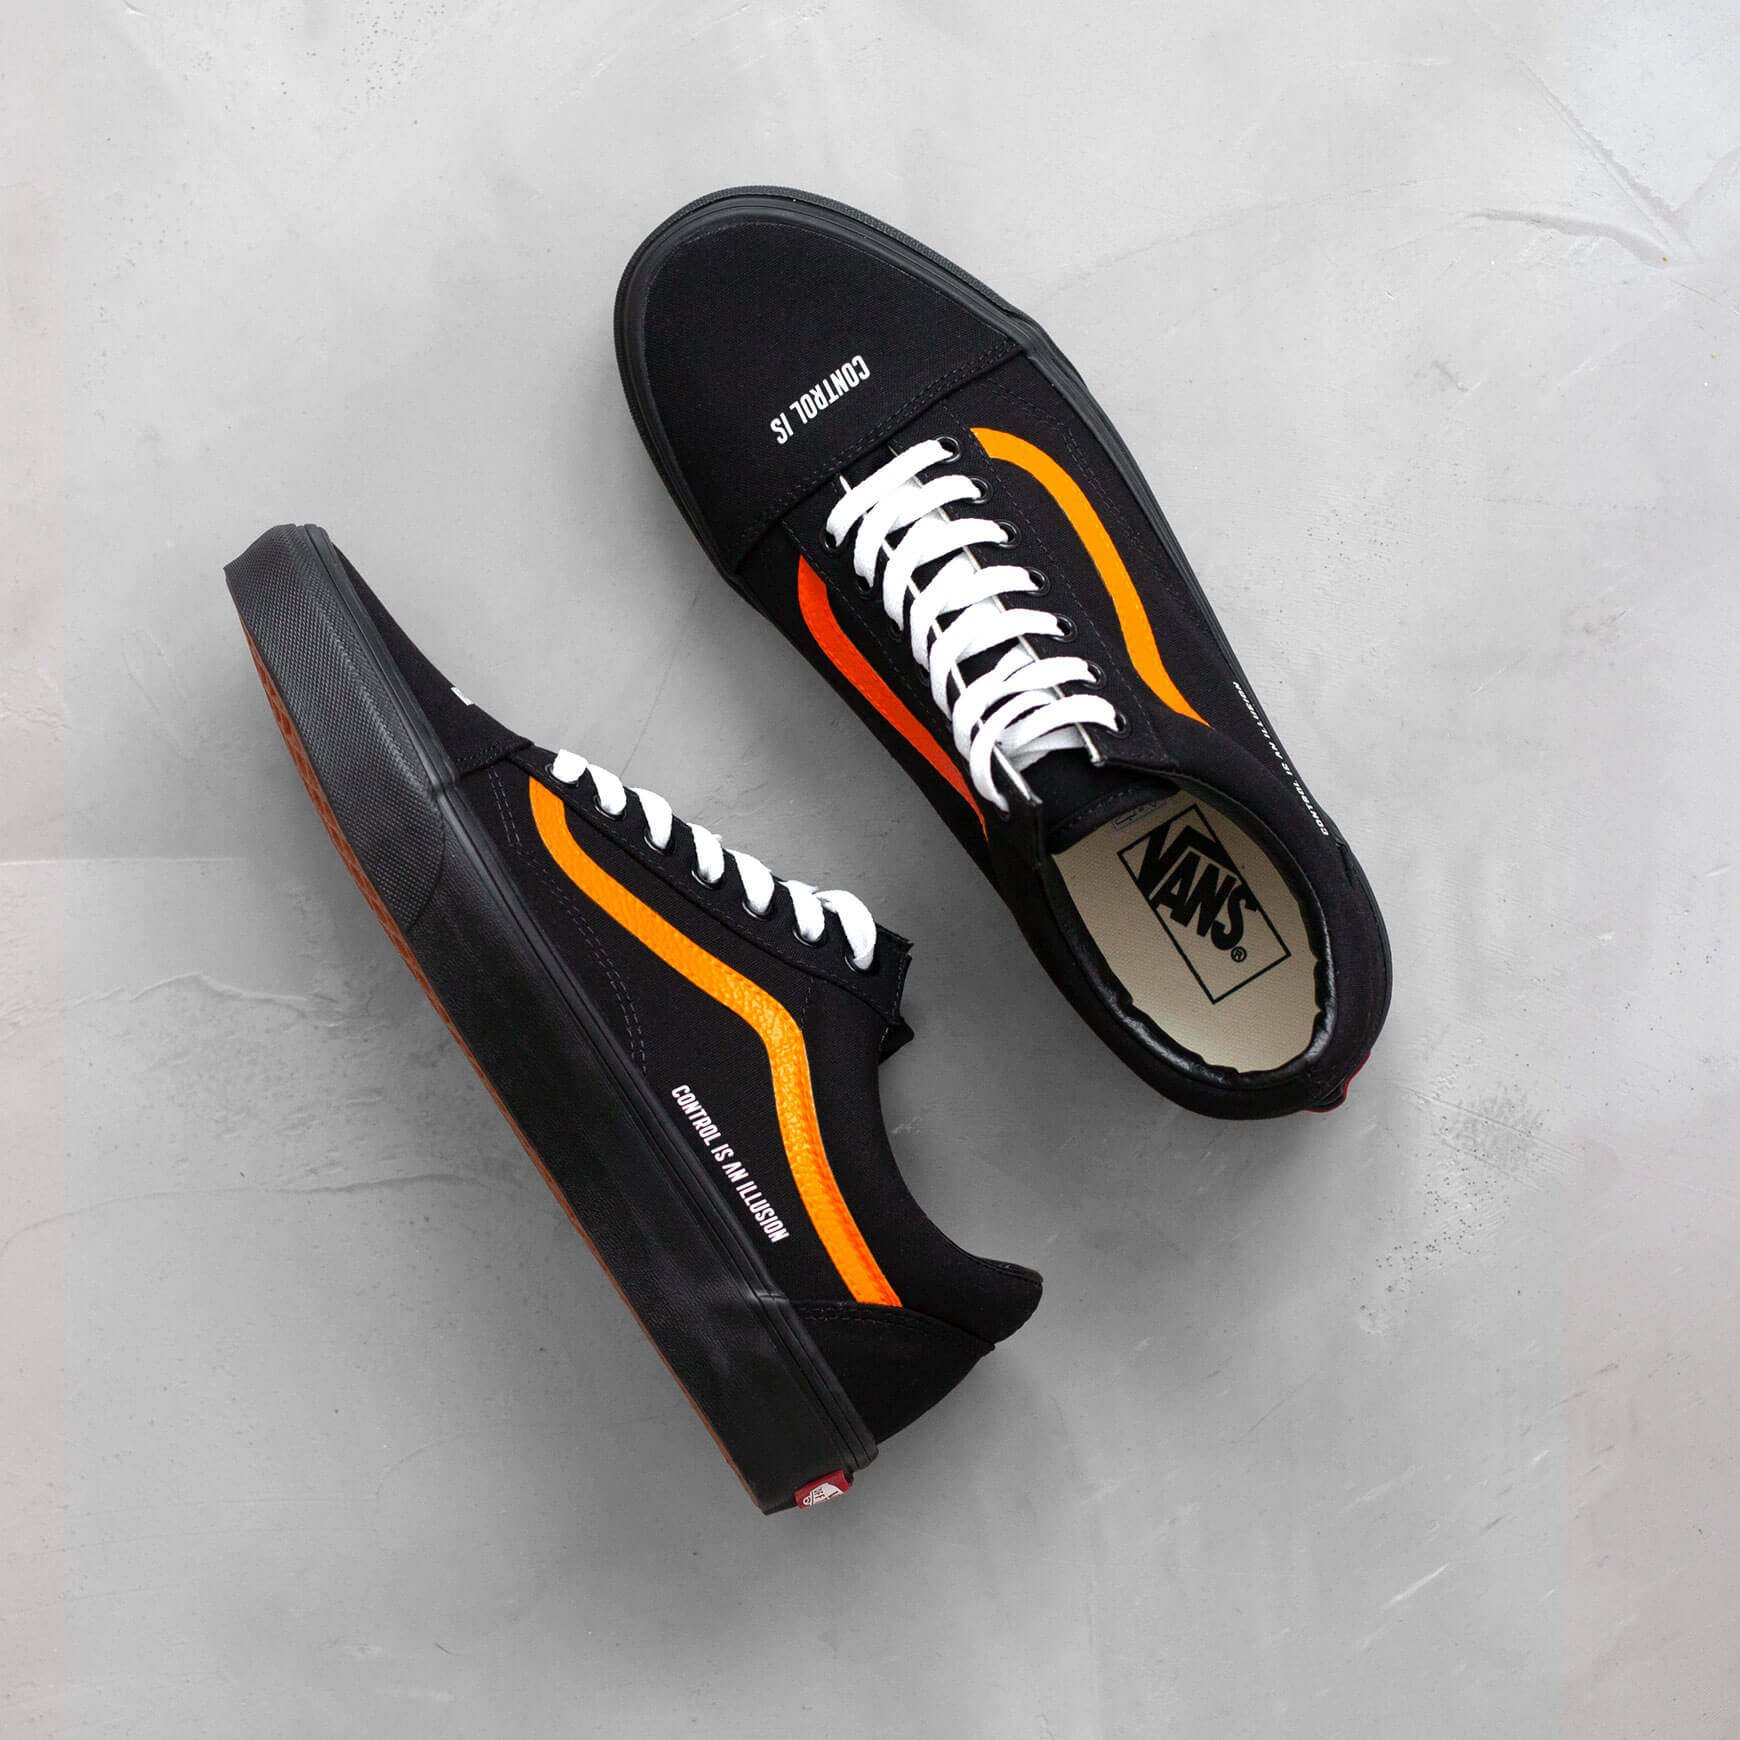 Coutié Vans Old Skool Control is an Illusion Custom